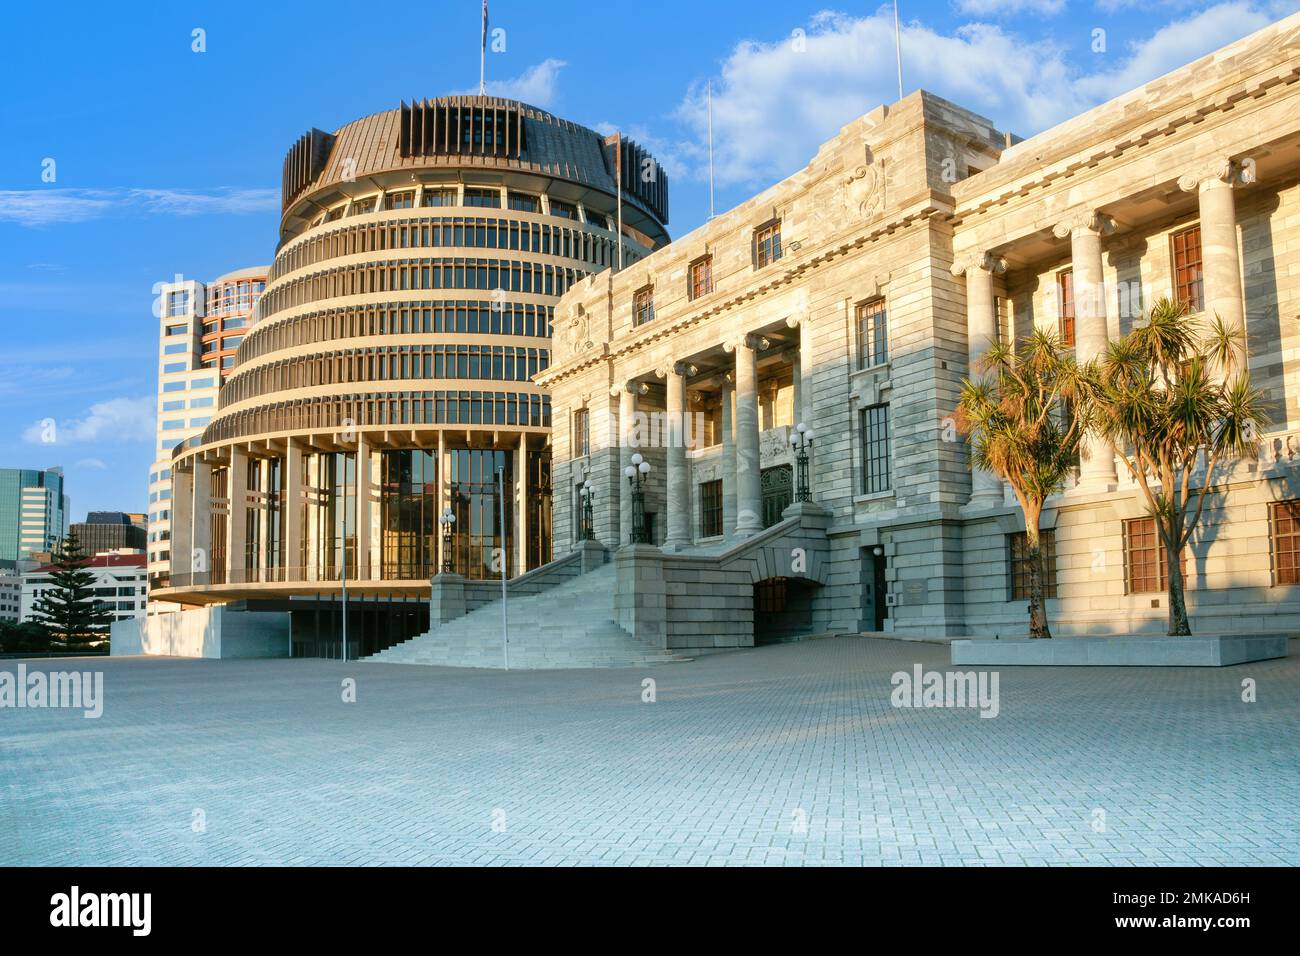 New Zealand Parliament and iconic Beehive building in Wellington Stock Photo